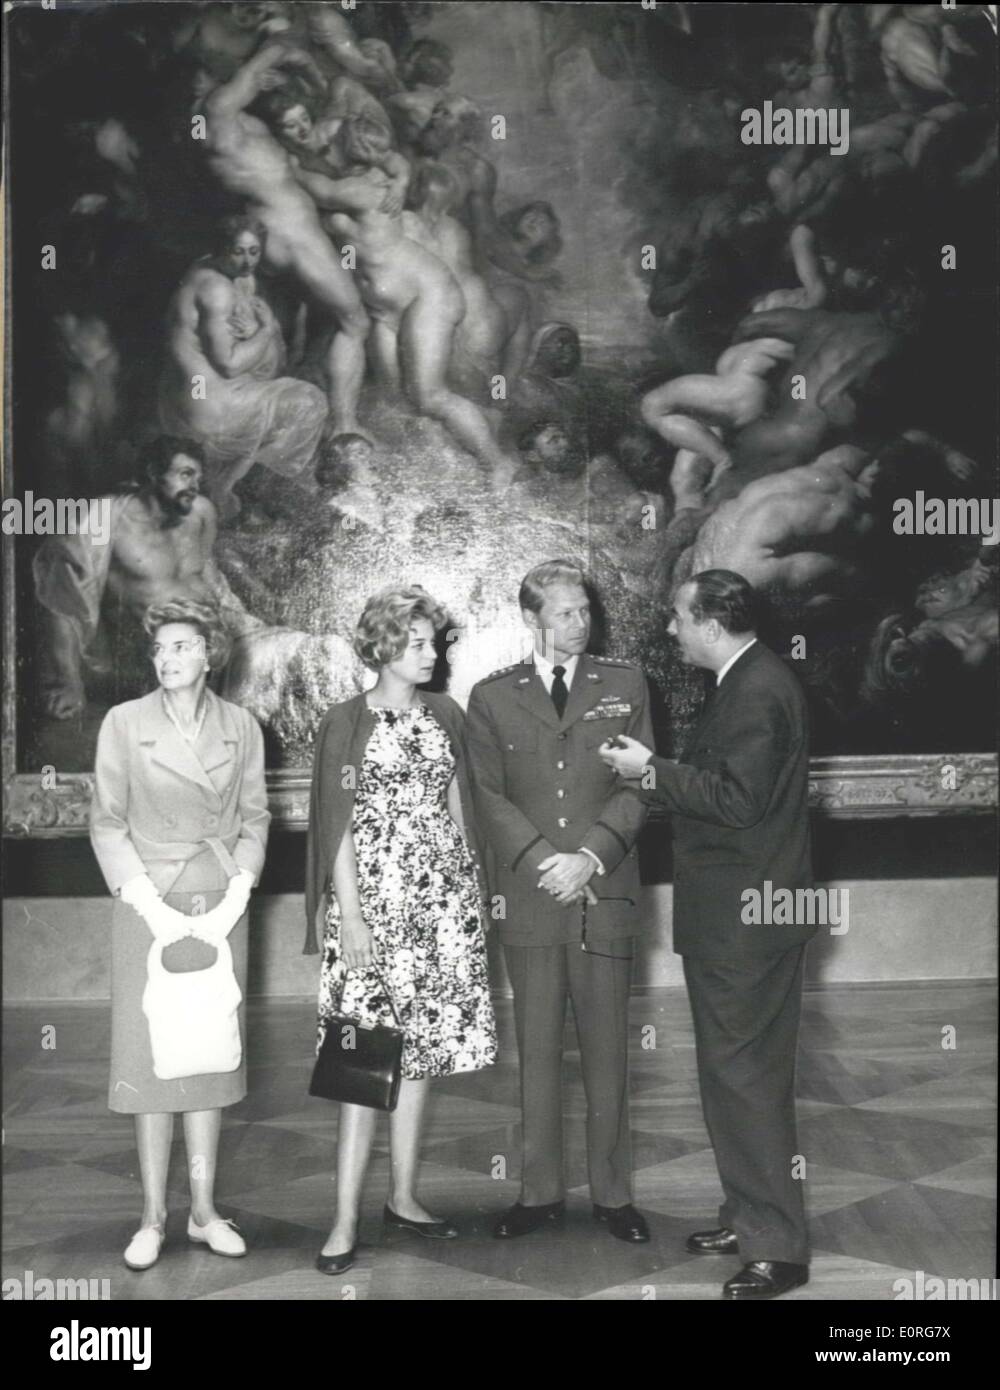 Jun. 17, 1959 - The NATO Commander in Chief in front of the ''Last Judgement'': The Commander-in-Chief of NATO-forces in Europe, General Lauri's D. Norstad , has visited the Alto Pinakothek in Munich on June 17th, 1959, during his stay in this town. His special interest was dedicated to the works orf Rube. Photo shows (left to right) In front of the ''Last Judgement'' by Peter Paul Rubens, the wife of General Norstad, his daughter, General Norstad and the Director of the Bavarian State Painting Collections, Conservator Dr. Christian Altgraf Salm. Stock Photo